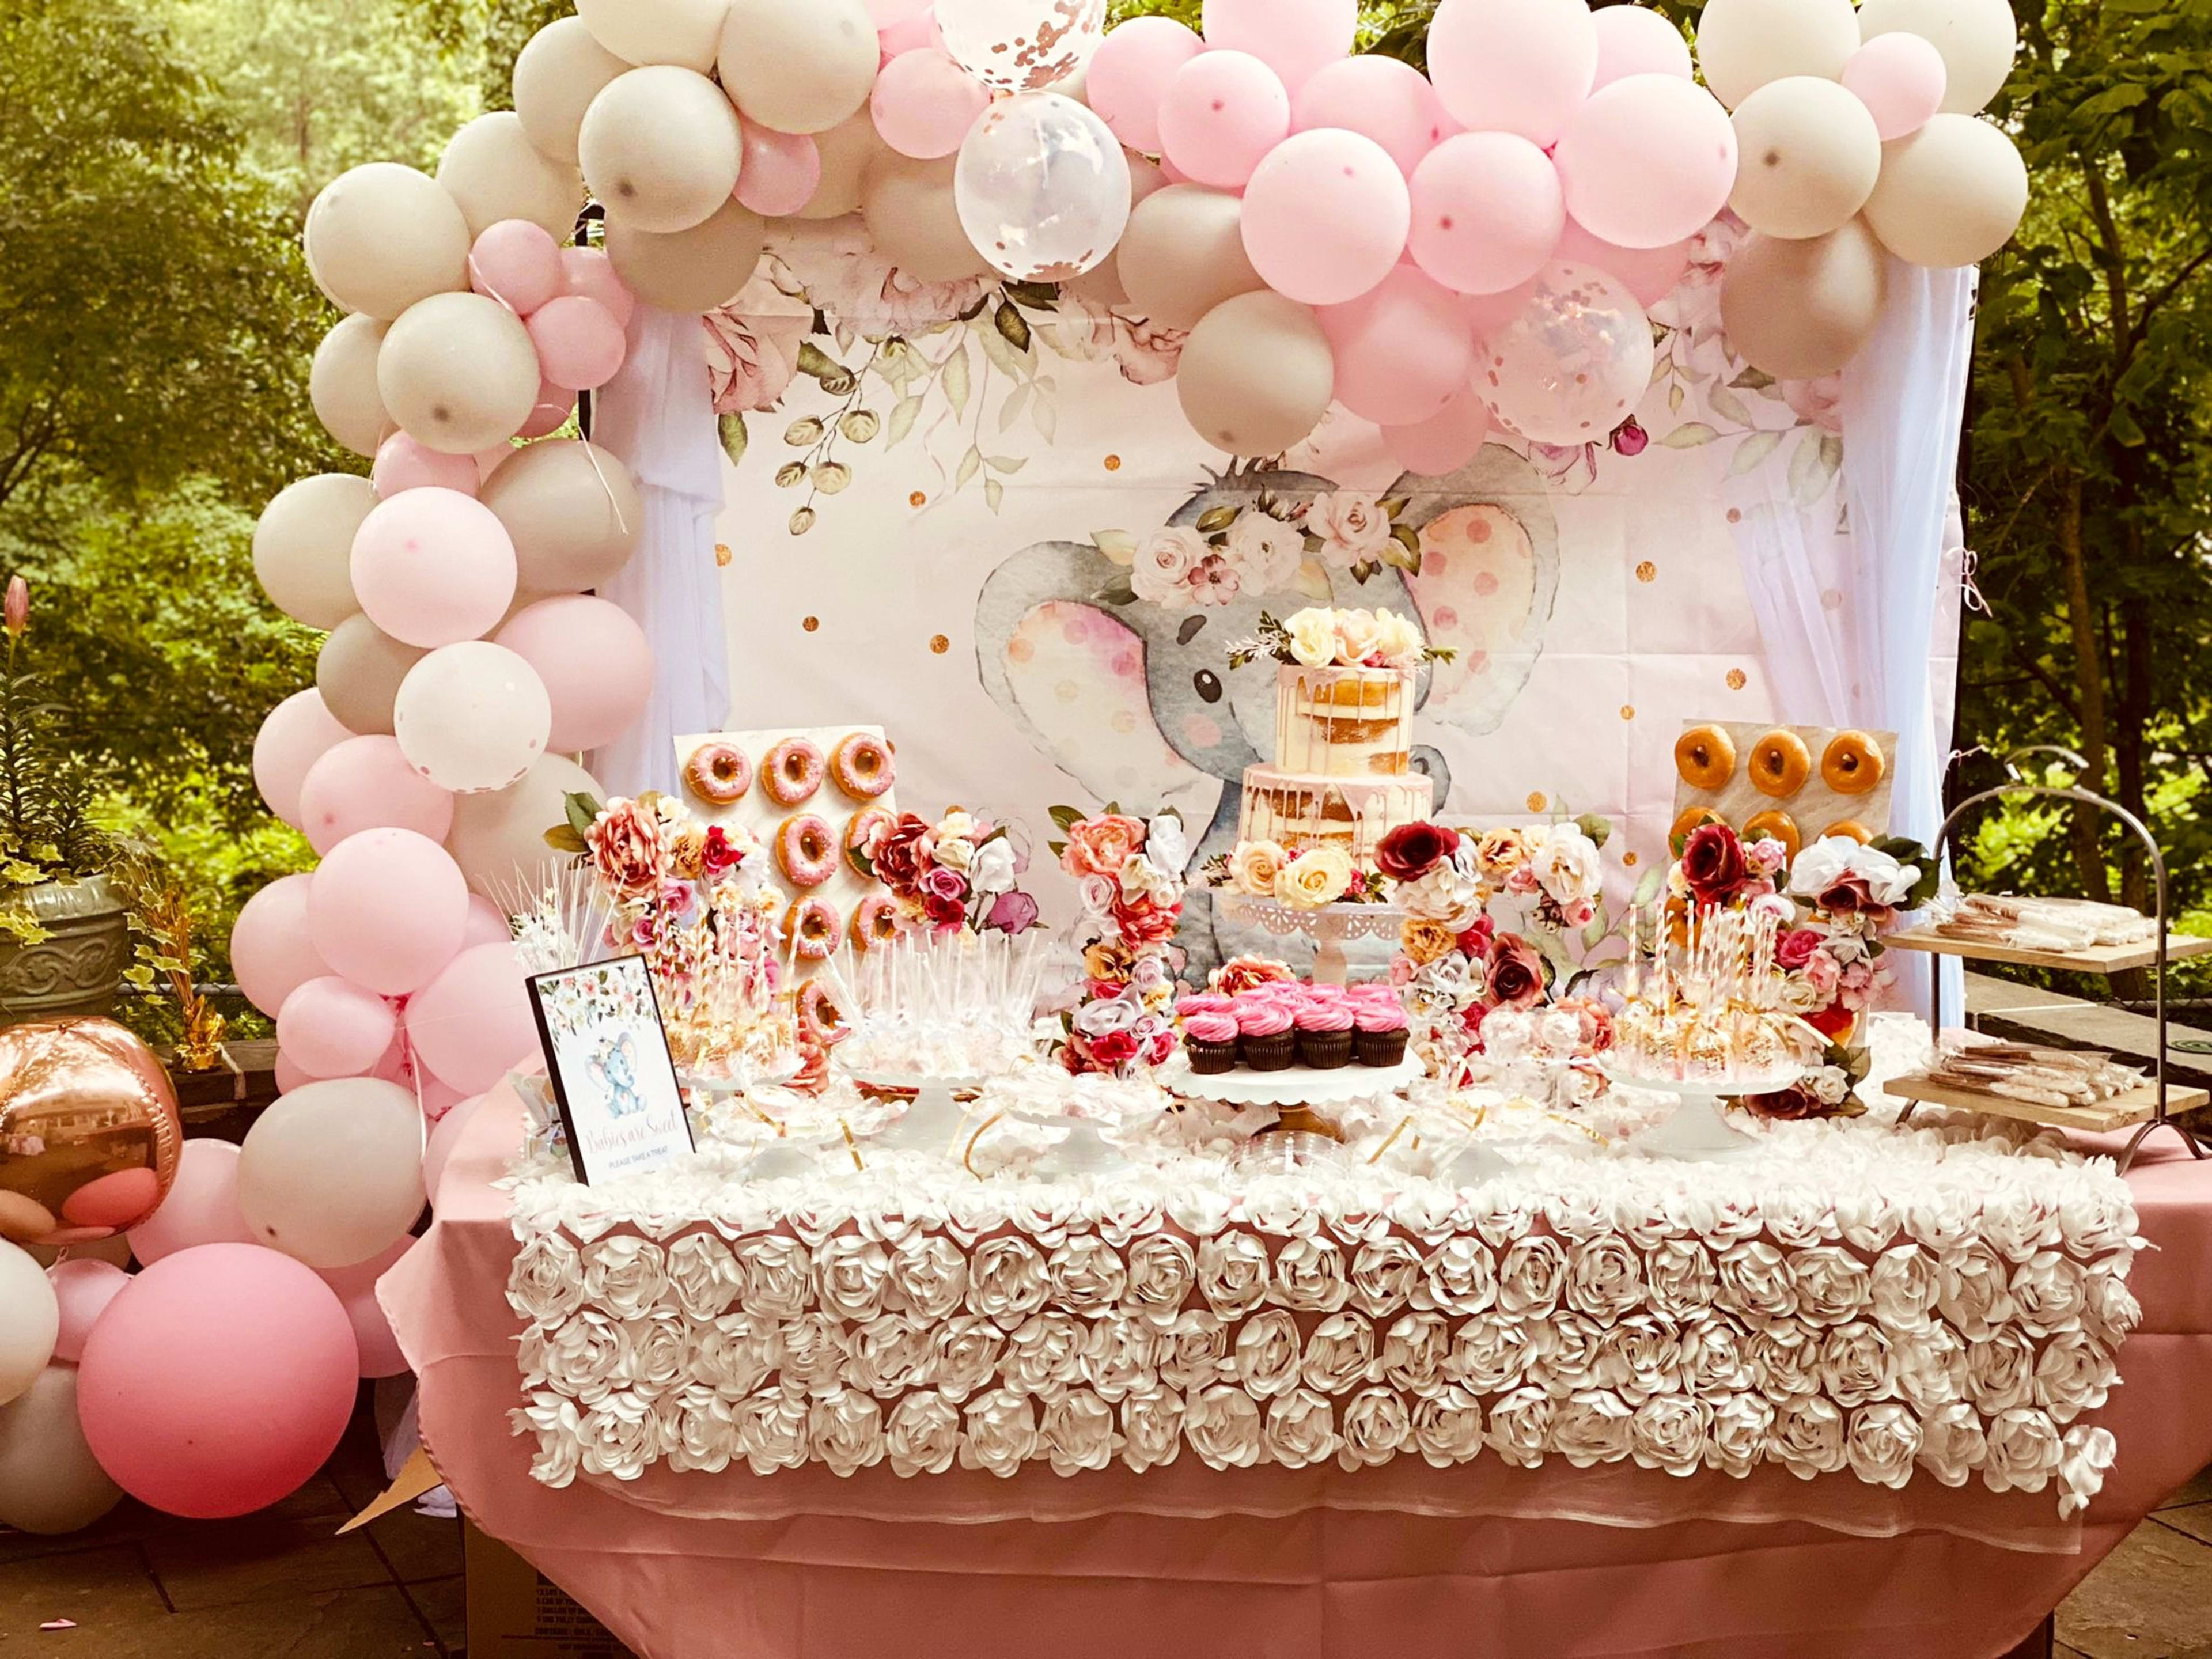 A pink and white cake sits atop a table decorated with balloons for a girl's outdoor baby shower.